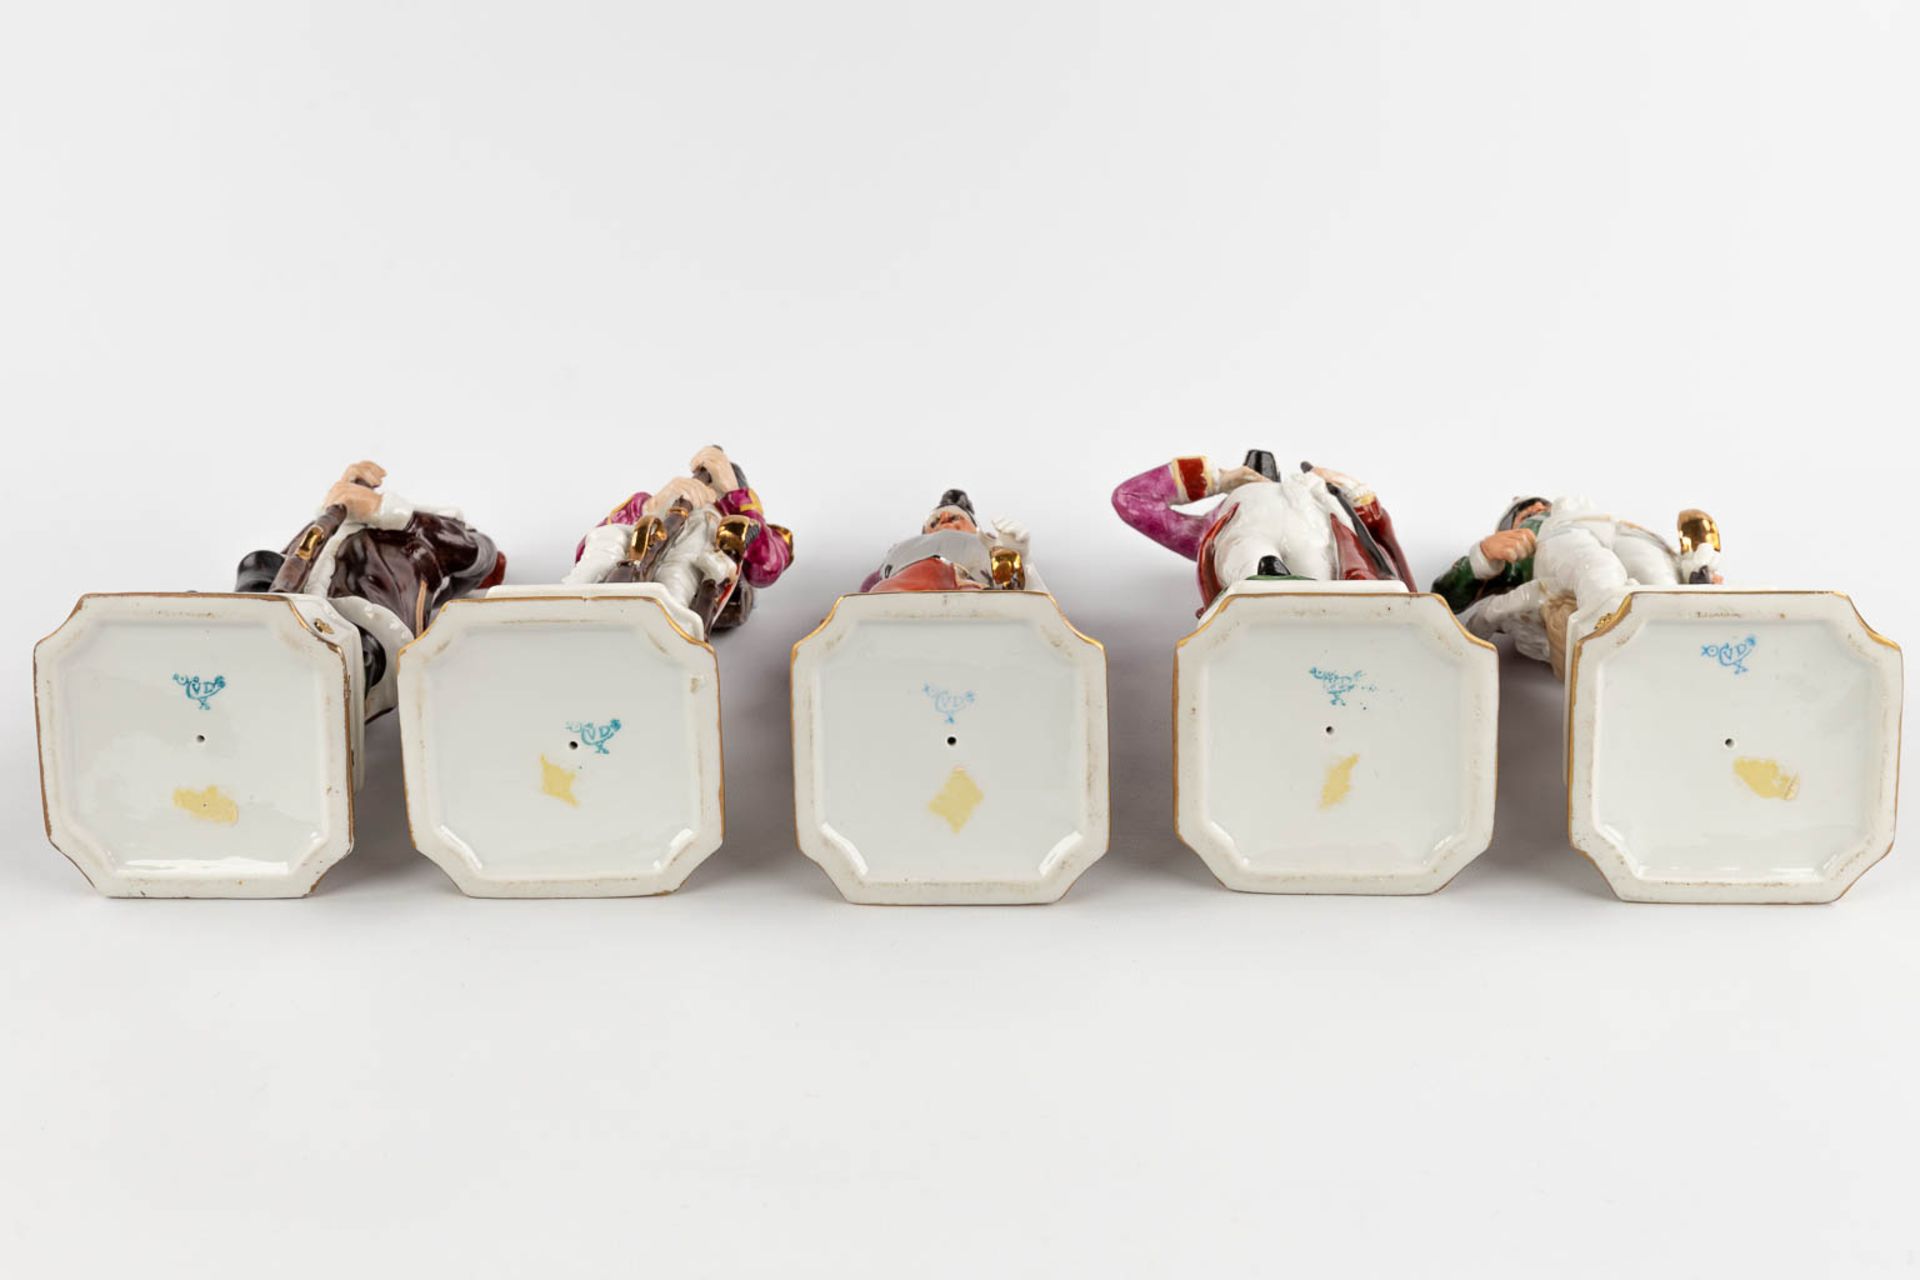 Napoleon and 9 generals, polychrome porcelain. 20th C. (H:32 cm) - Image 10 of 15